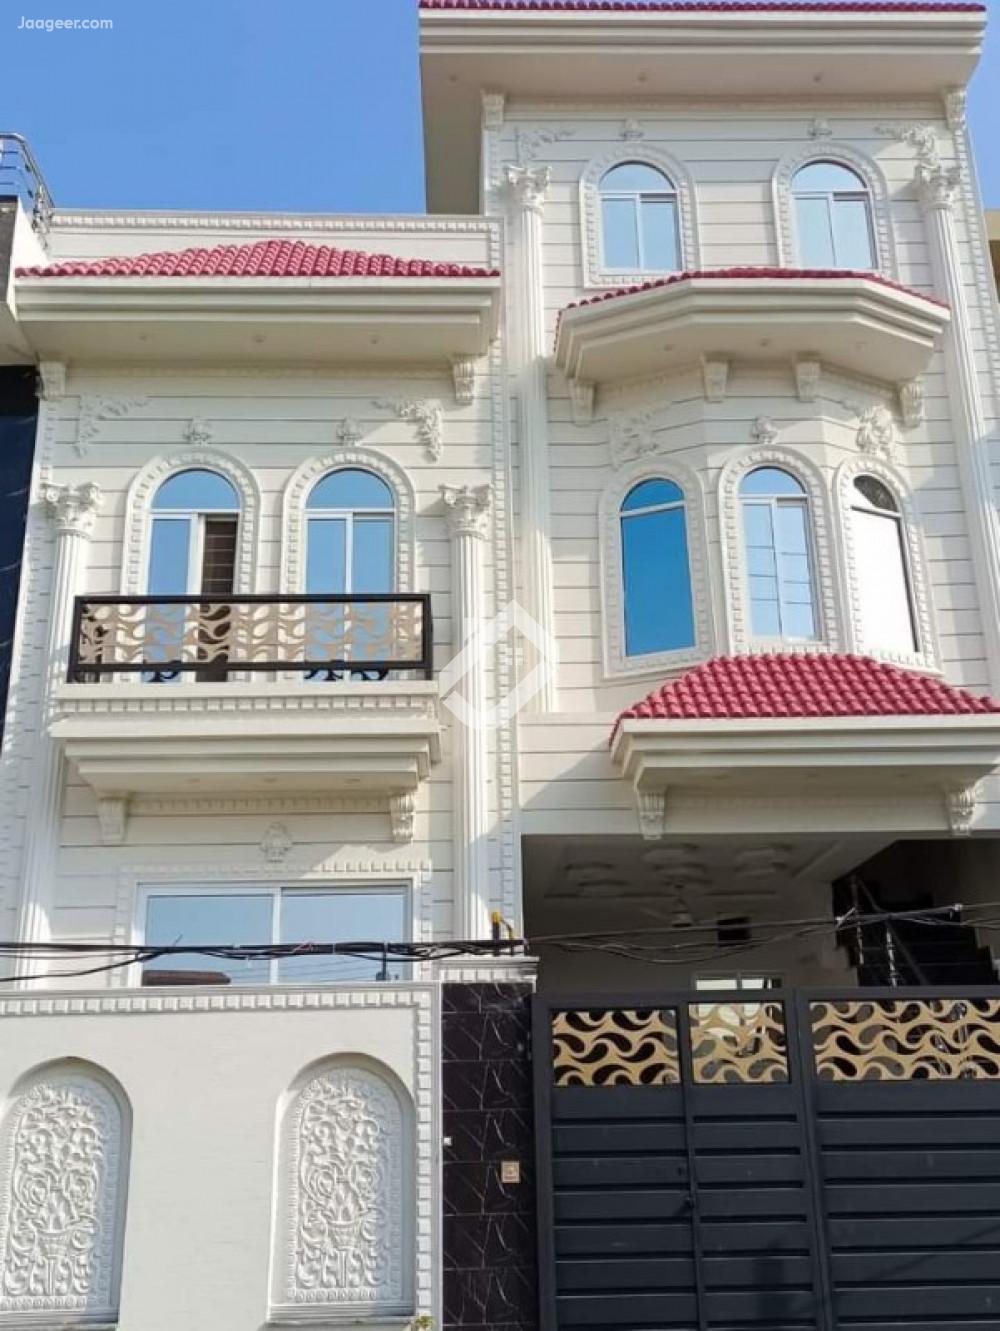 Main image 5 Marla Double Storey House For Sale In Bismillah Housing Scheme GT Road Phase-1 GT Road Haider Block GT Road